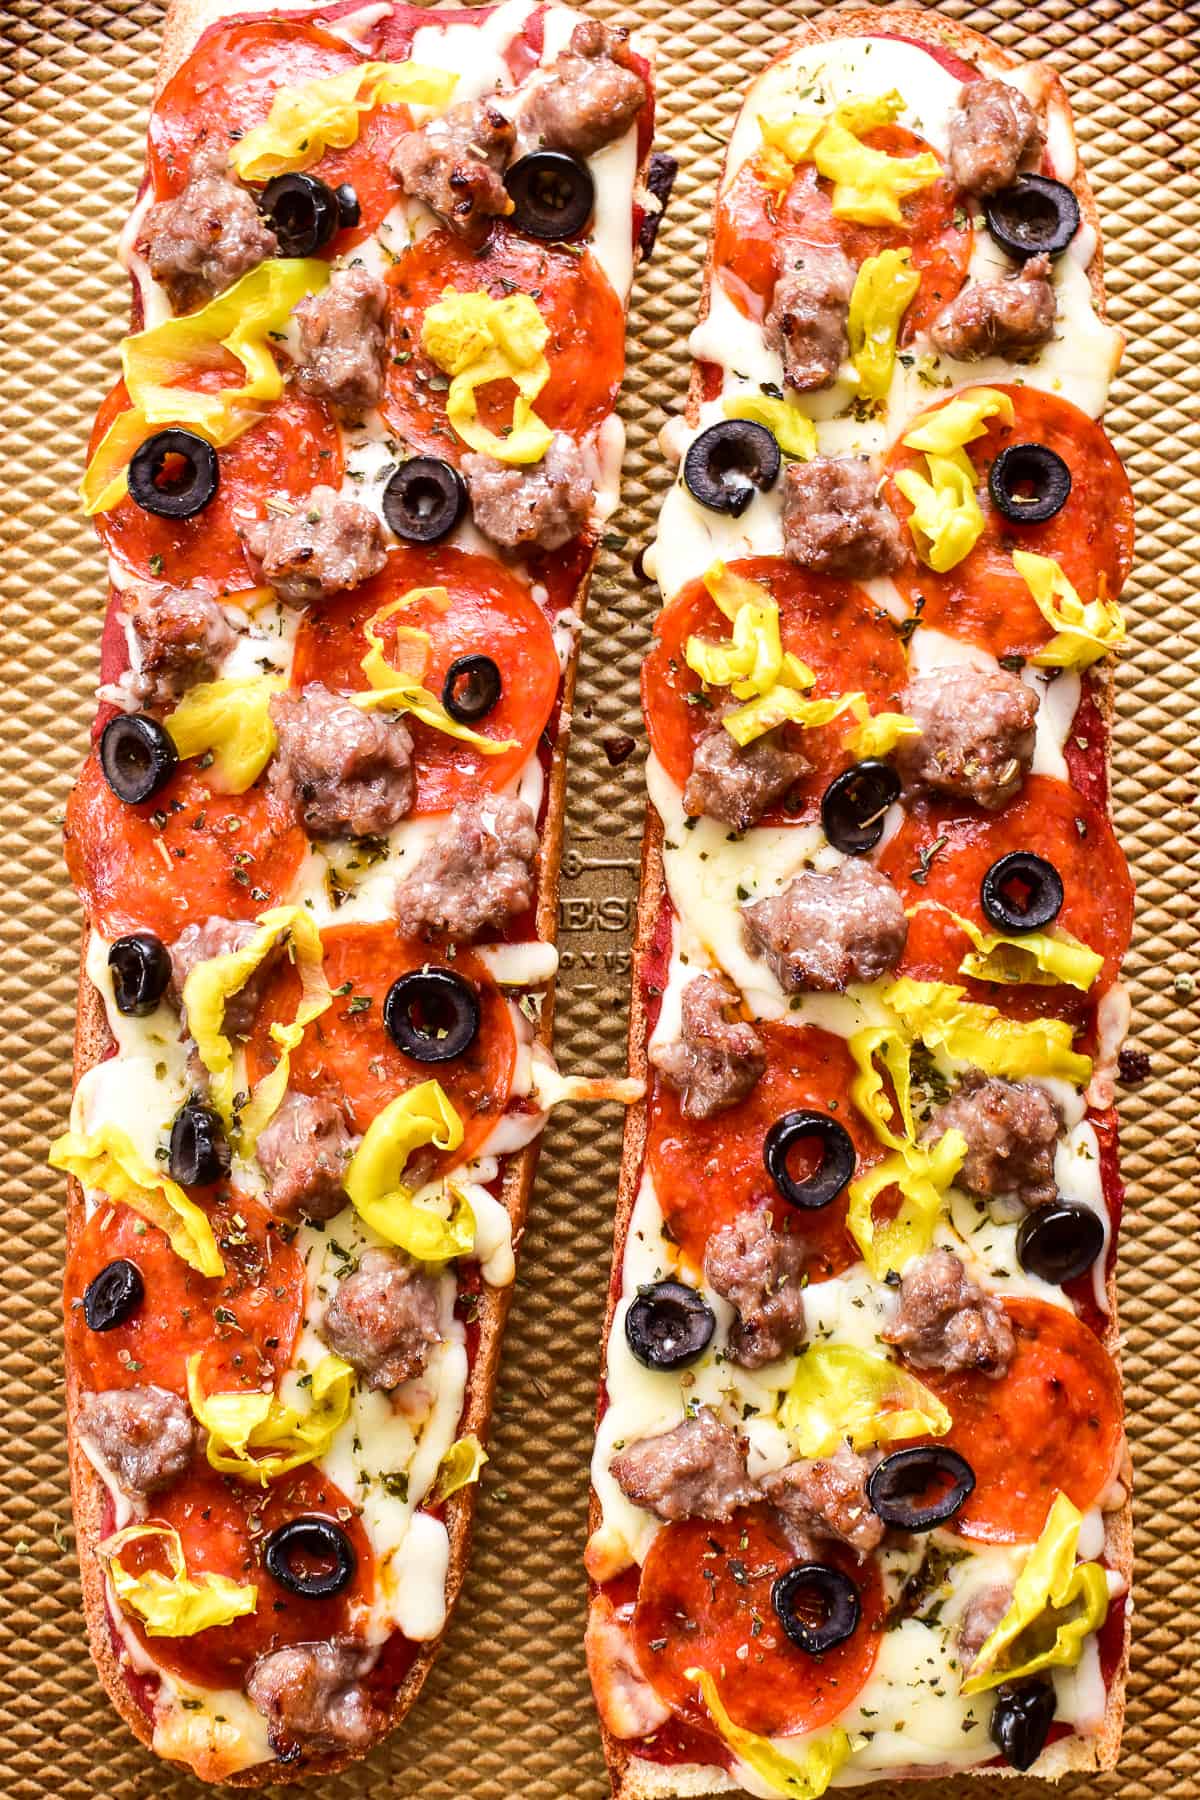 Overhead image of 2 French Bread Pizzas topped with sausage, pepperoni, black olives, and pepperoncini peppers